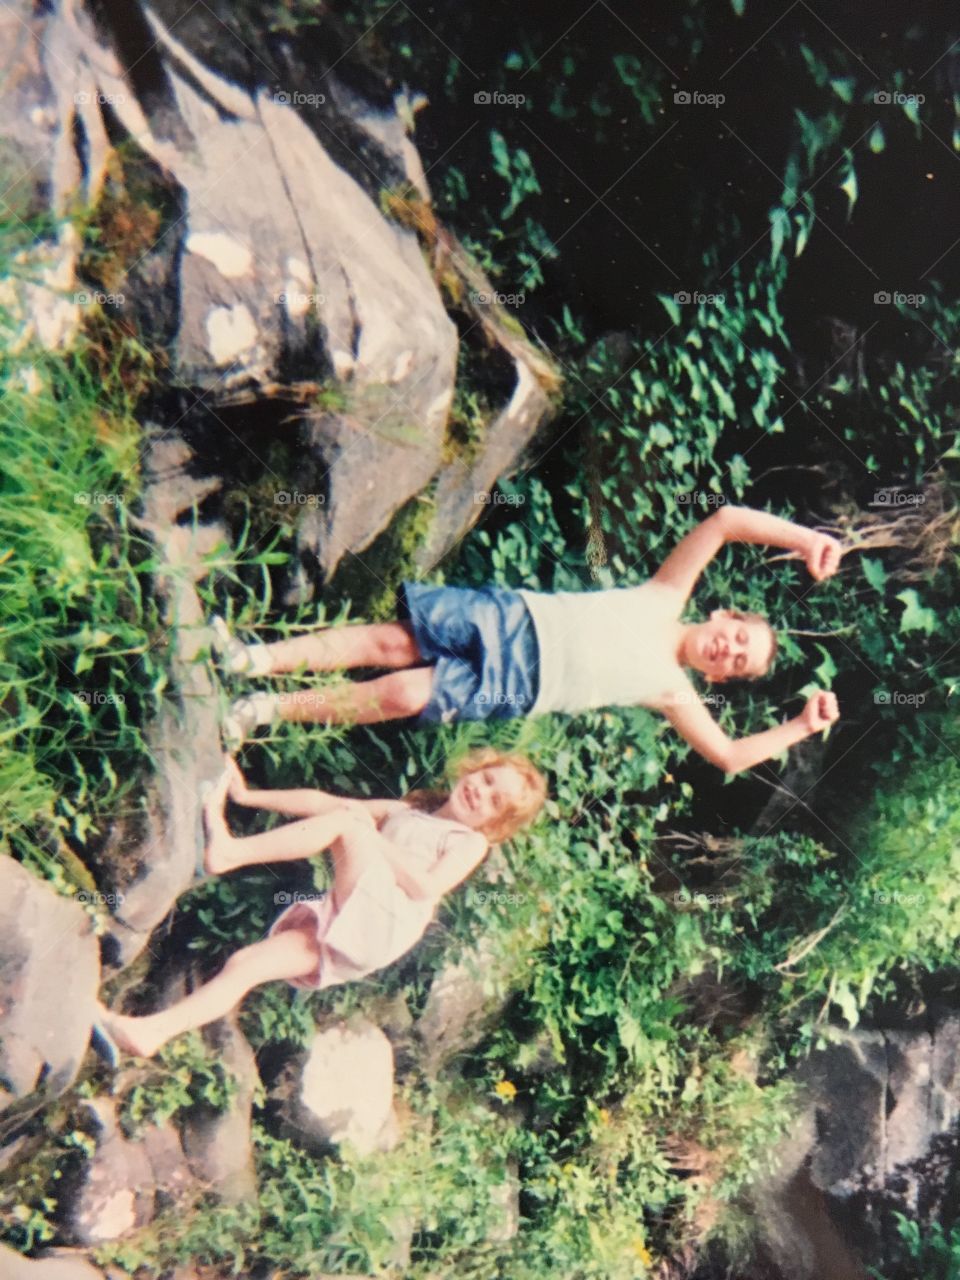 My brother and I climbing a mountain